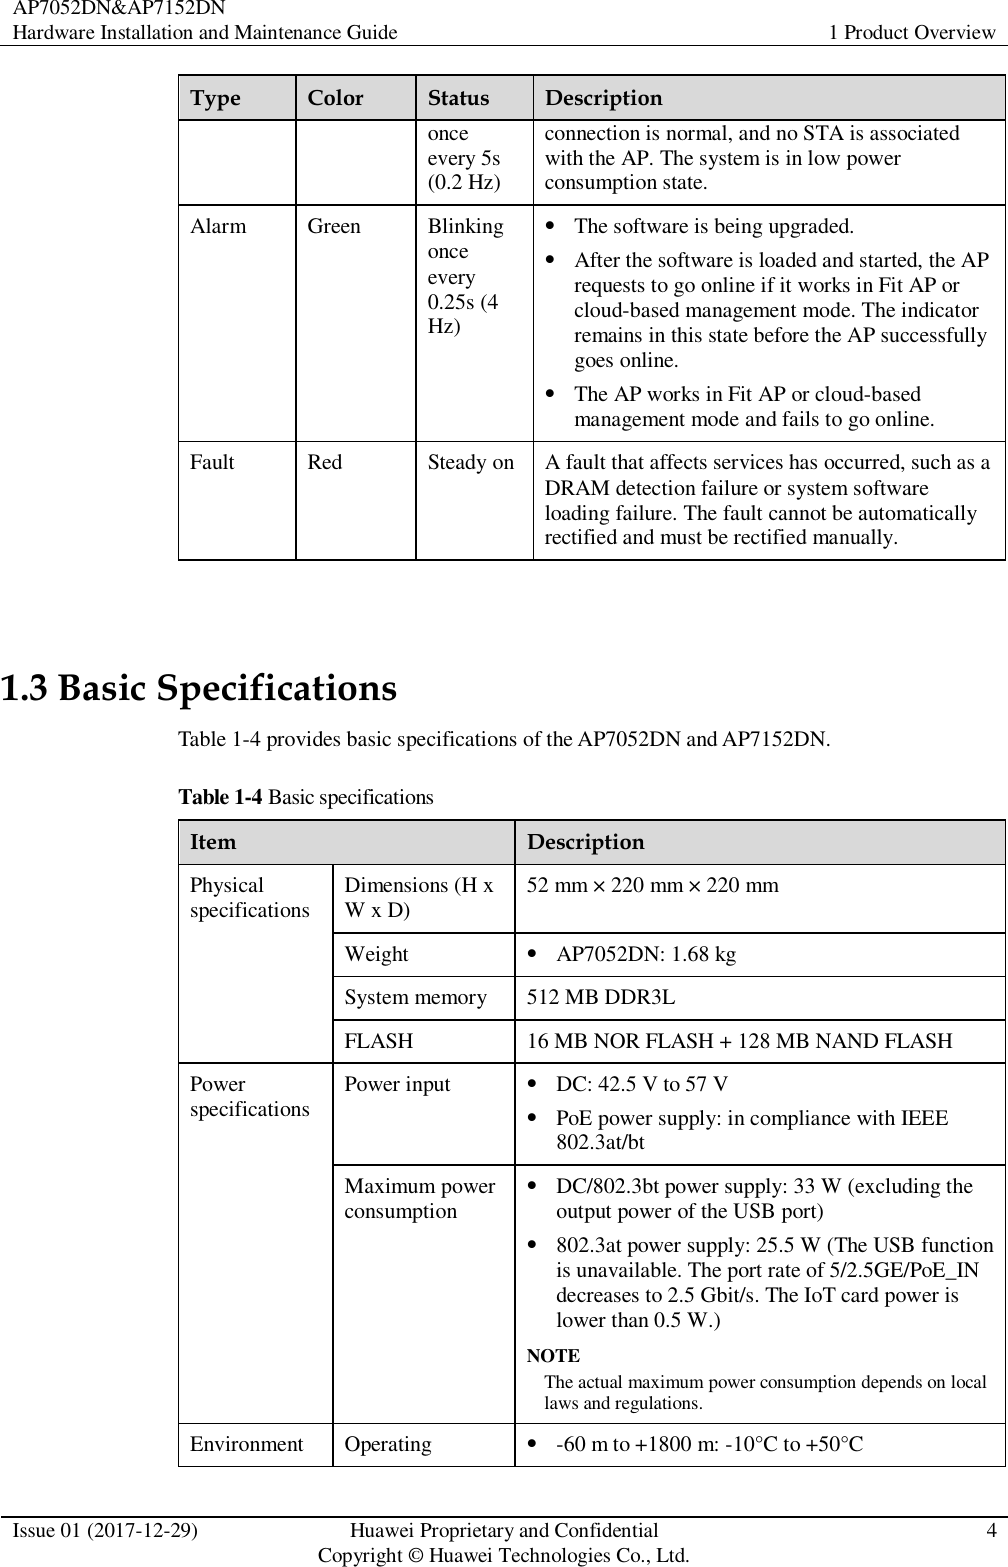 AP7052DN&amp;AP7152DN Hardware Installation and Maintenance Guide 1 Product Overview  Issue 01 (2017-12-29) Huawei Proprietary and Confidential                                     Copyright © Huawei Technologies Co., Ltd. 4  Type Color Status Description once every 5s (0.2 Hz) connection is normal, and no STA is associated with the AP. The system is in low power consumption state. Alarm Green Blinking once every 0.25s (4 Hz)  The software is being upgraded.  After the software is loaded and started, the AP requests to go online if it works in Fit AP or cloud-based management mode. The indicator remains in this state before the AP successfully goes online.  The AP works in Fit AP or cloud-based management mode and fails to go online. Fault Red Steady on A fault that affects services has occurred, such as a DRAM detection failure or system software loading failure. The fault cannot be automatically rectified and must be rectified manually.  1.3 Basic Specifications Table 1-4 provides basic specifications of the AP7052DN and AP7152DN. Table 1-4 Basic specifications Item Description Physical specifications Dimensions (H x W x D) 52 mm × 220 mm × 220 mm Weight  AP7052DN: 1.68 kg System memory 512 MB DDR3L FLASH 16 MB NOR FLASH + 128 MB NAND FLASH Power specifications Power input  DC: 42.5 V to 57 V  PoE power supply: in compliance with IEEE 802.3at/bt Maximum power consumption  DC/802.3bt power supply: 33 W (excluding the output power of the USB port)  802.3at power supply: 25.5 W (The USB function is unavailable. The port rate of 5/2.5GE/PoE_IN decreases to 2.5 Gbit/s. The IoT card power is lower than 0.5 W.) NOTE The actual maximum power consumption depends on local laws and regulations. Environment Operating  -60 m to +1800 m: -10°C to +50°C 